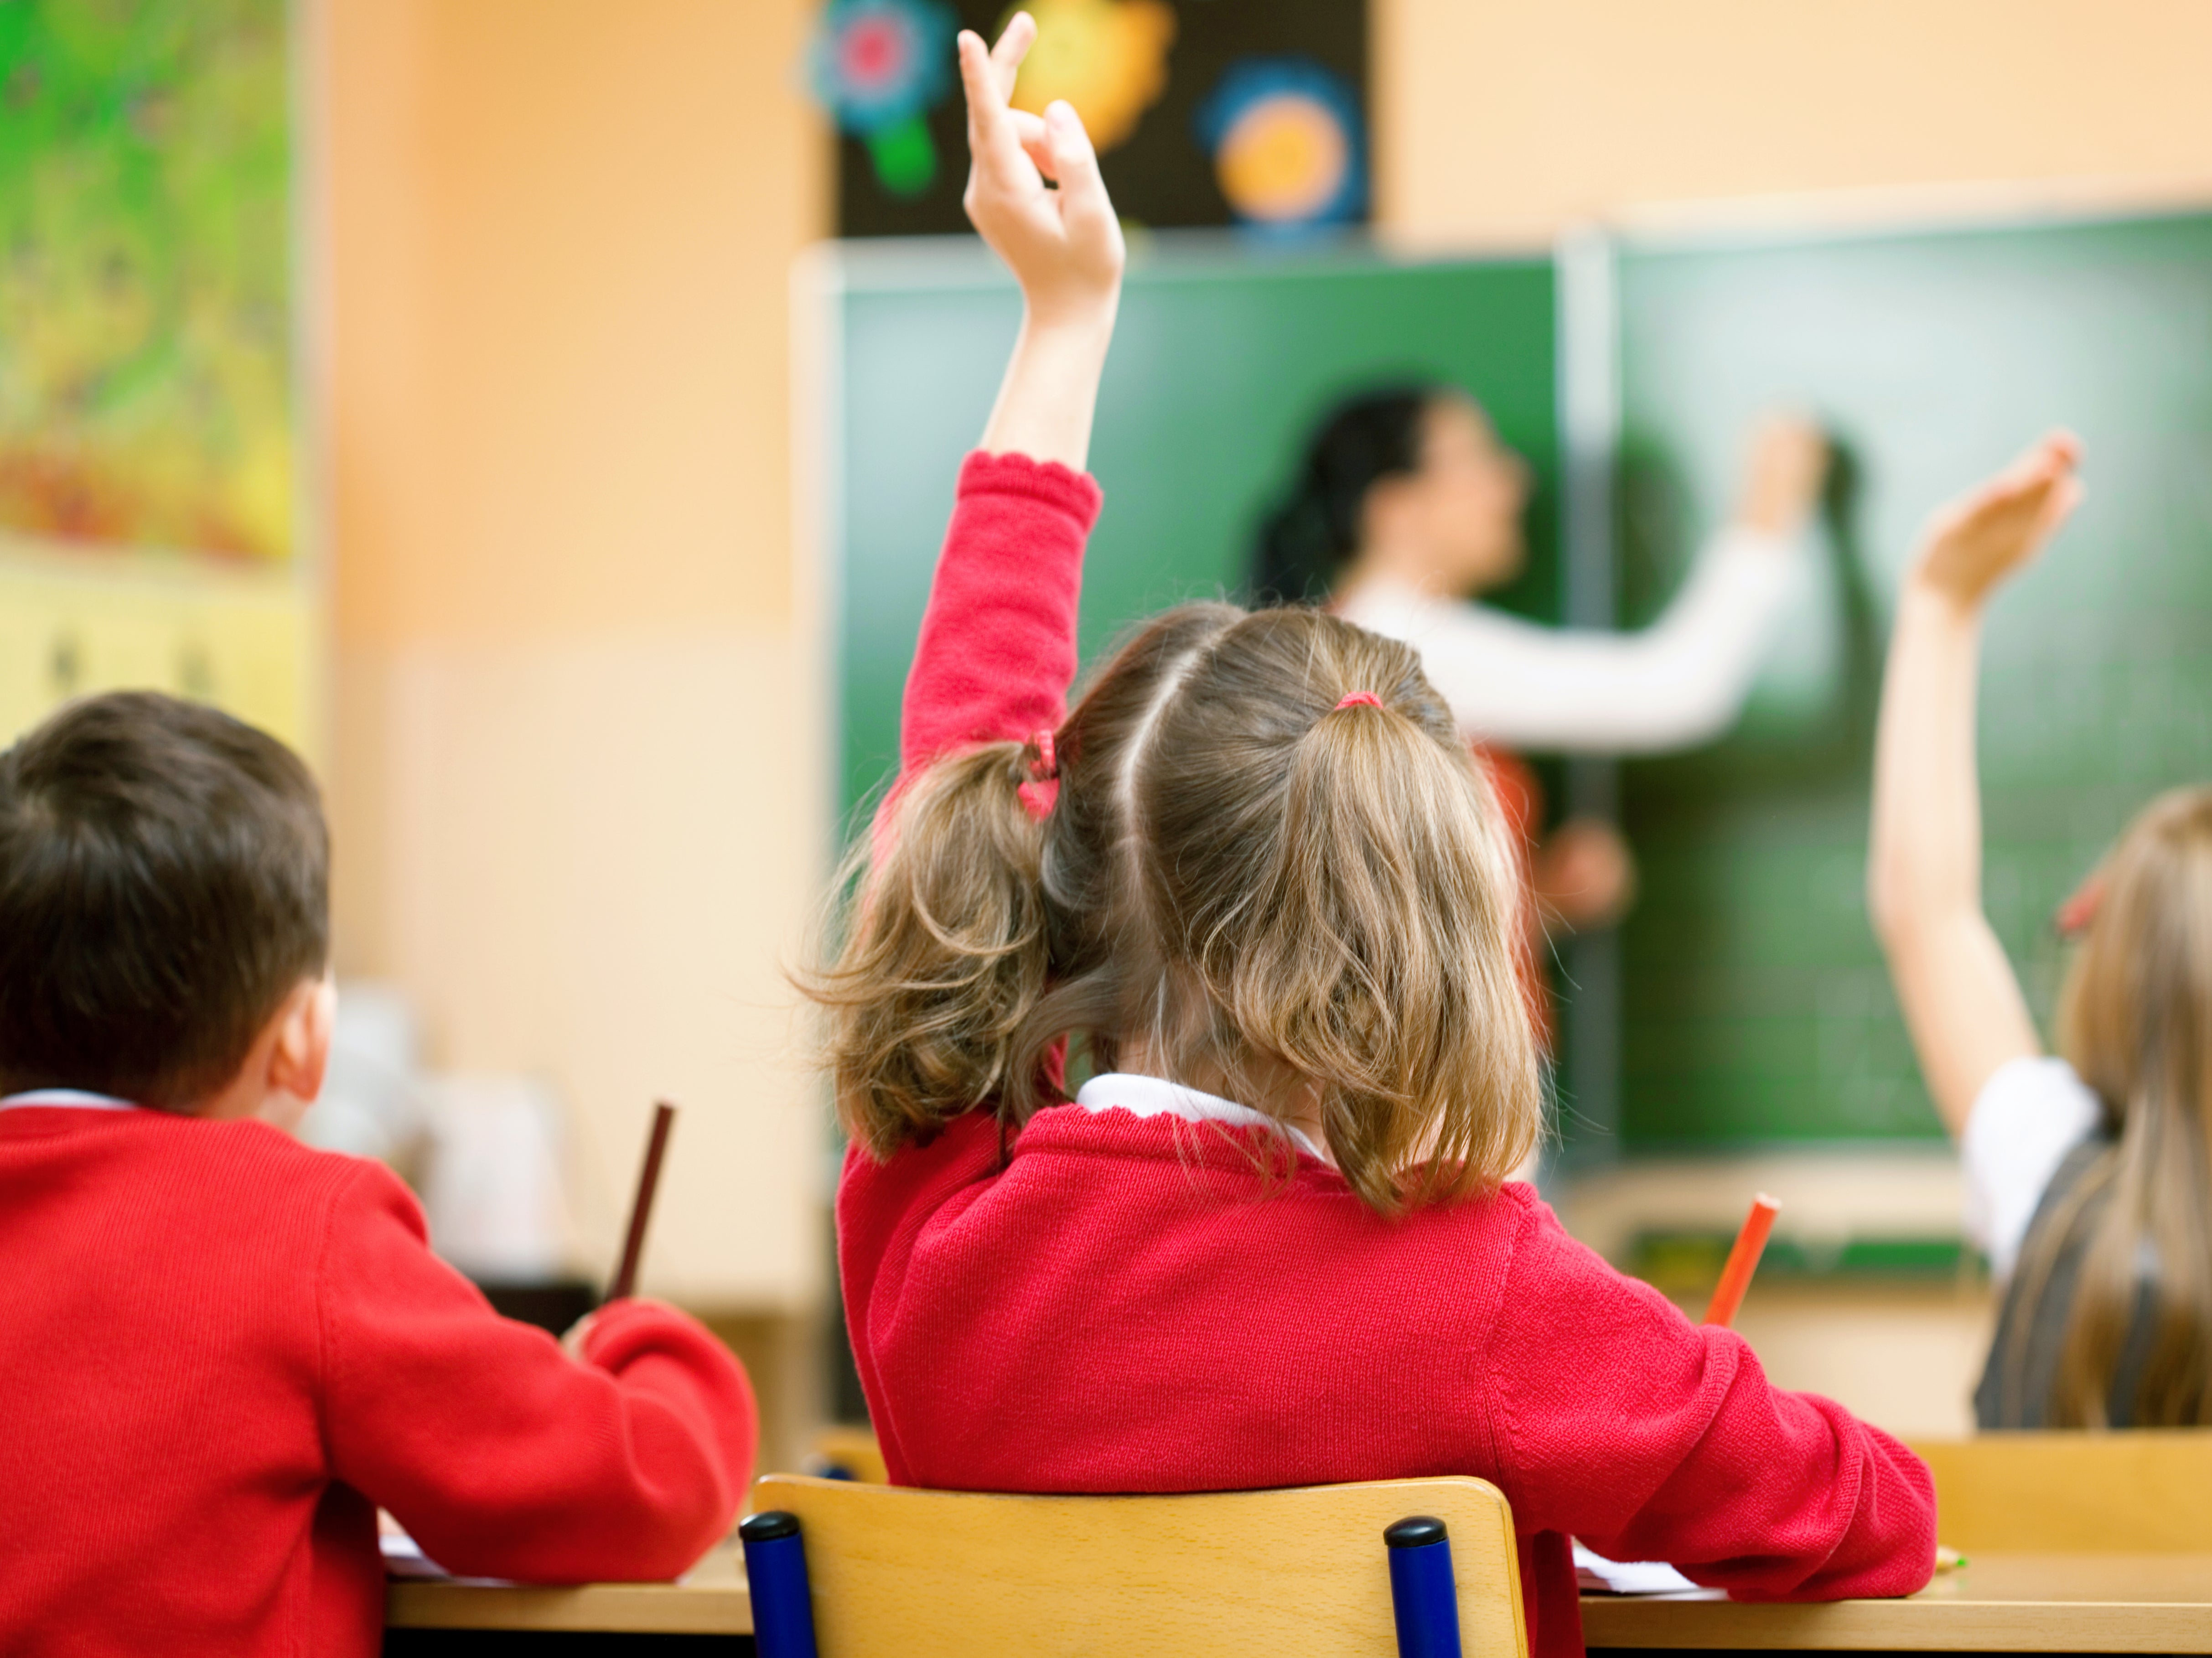 Around 16 per cent of children attended state school last week, DfE figures show